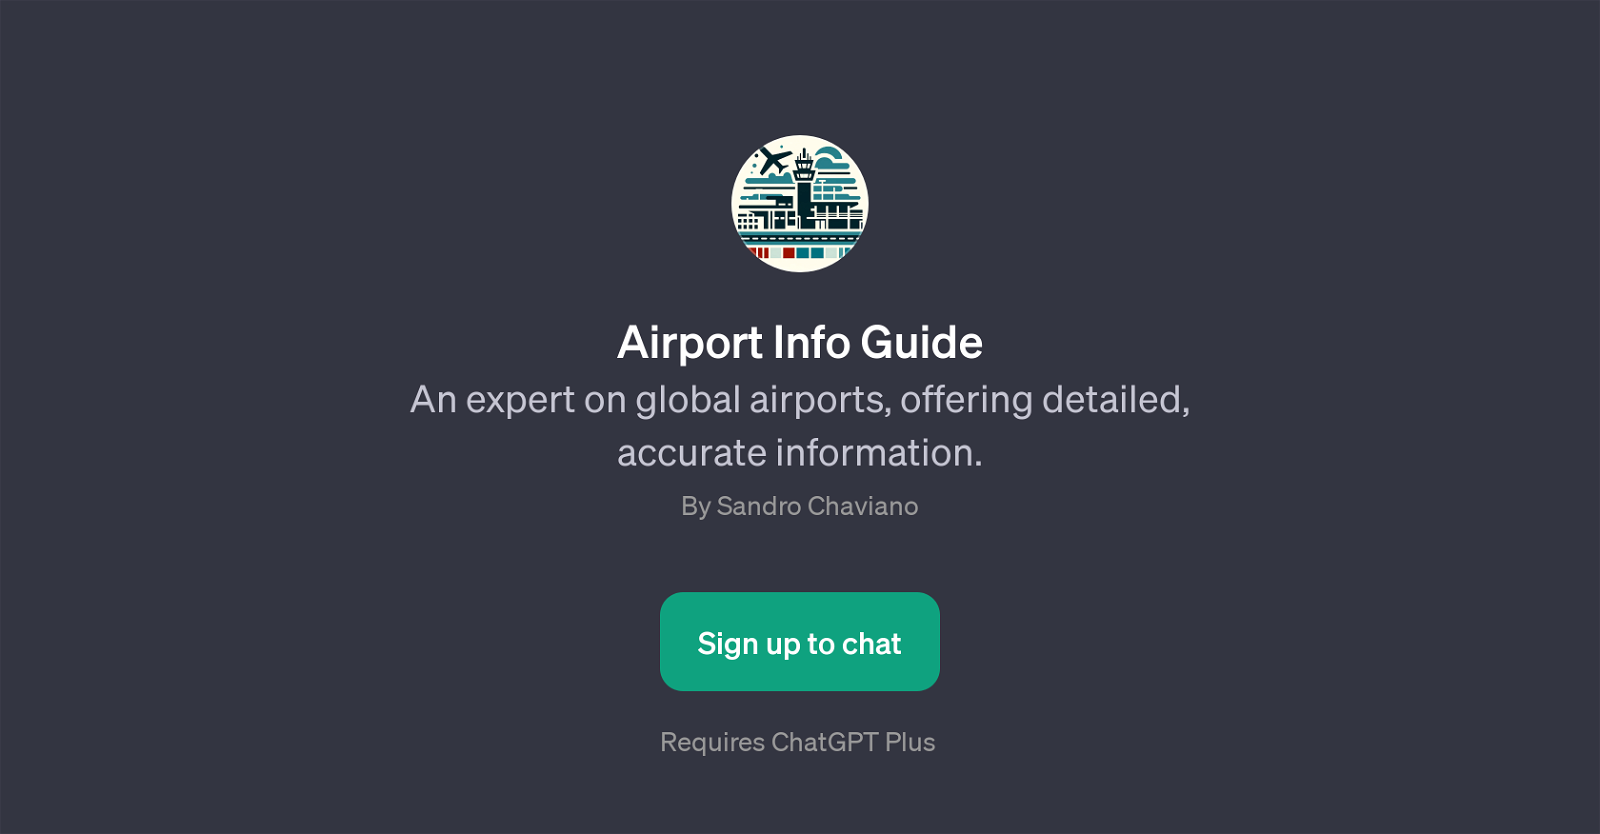 Airport Info Guide website